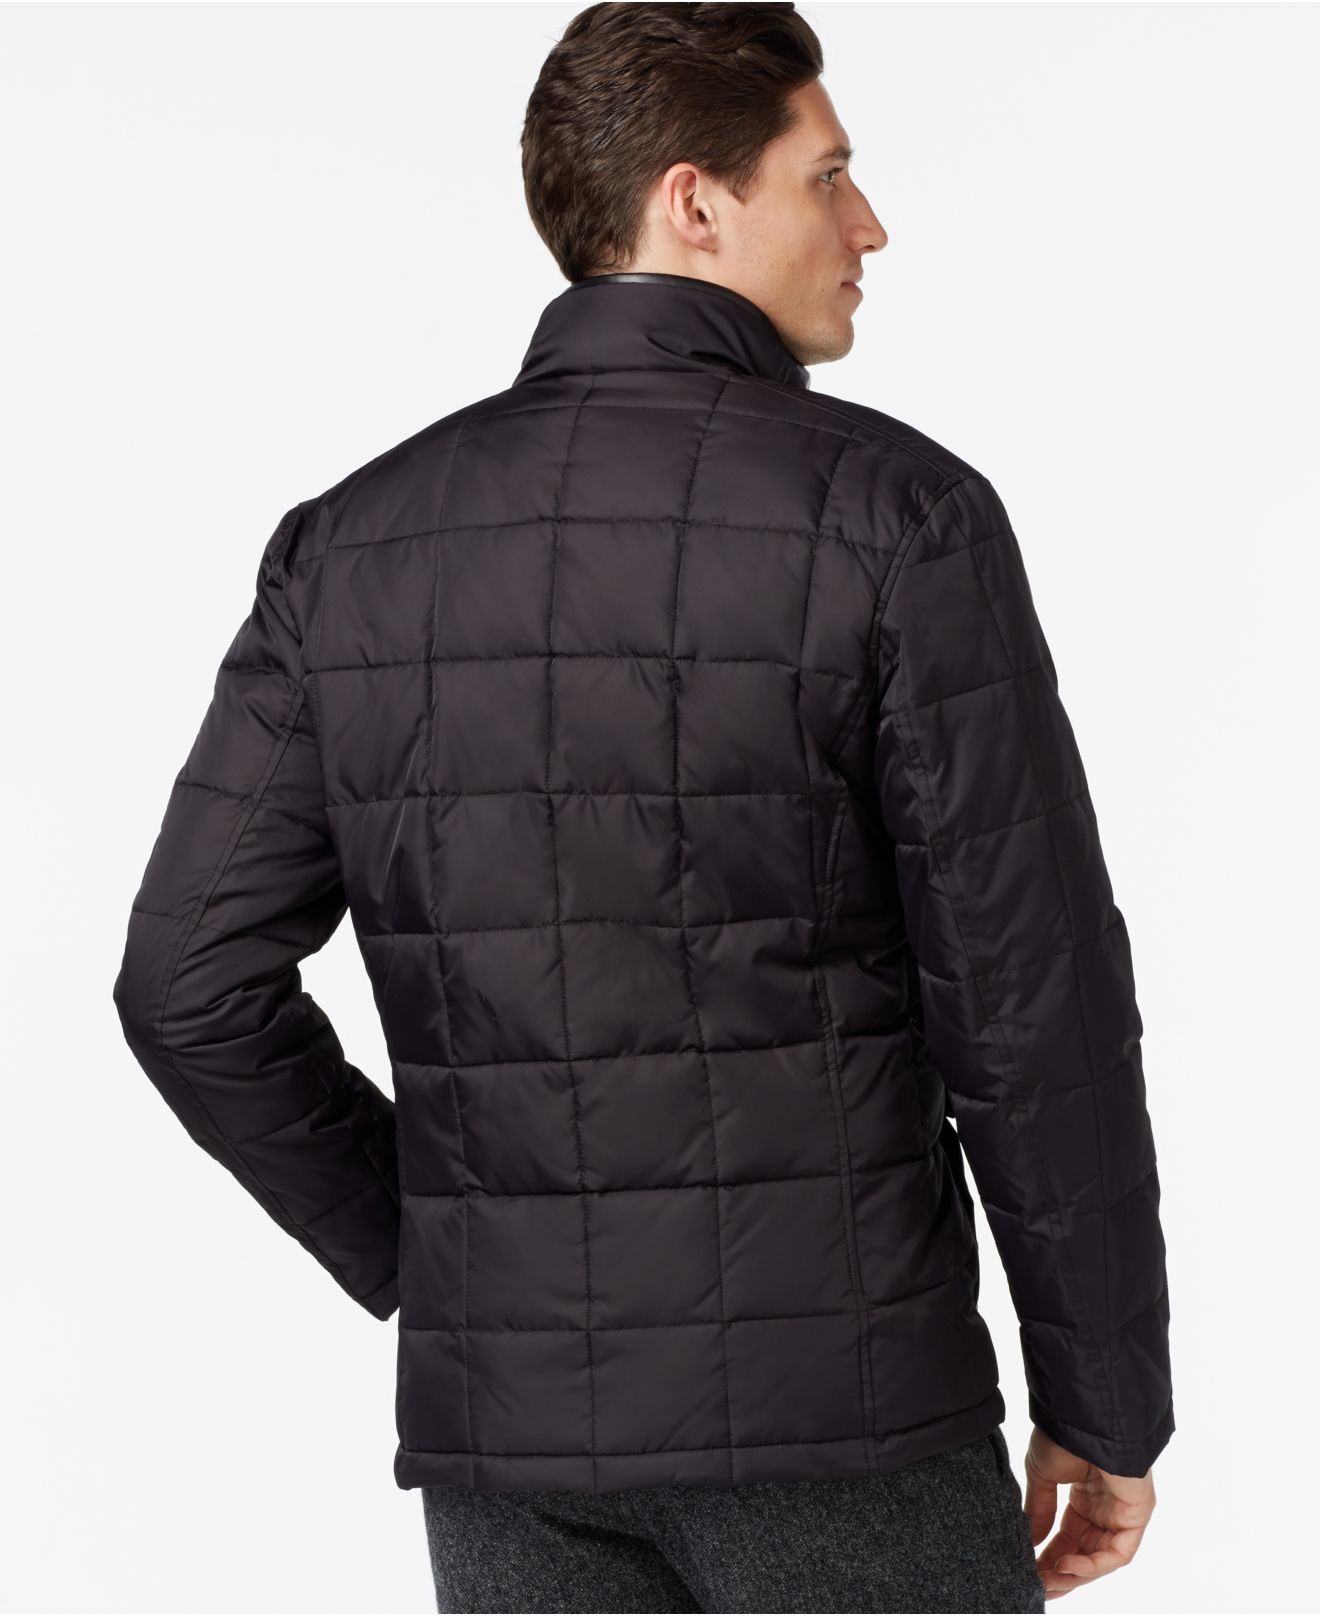 Lyst - Cole Haan Quilted Jacket in Black for Men